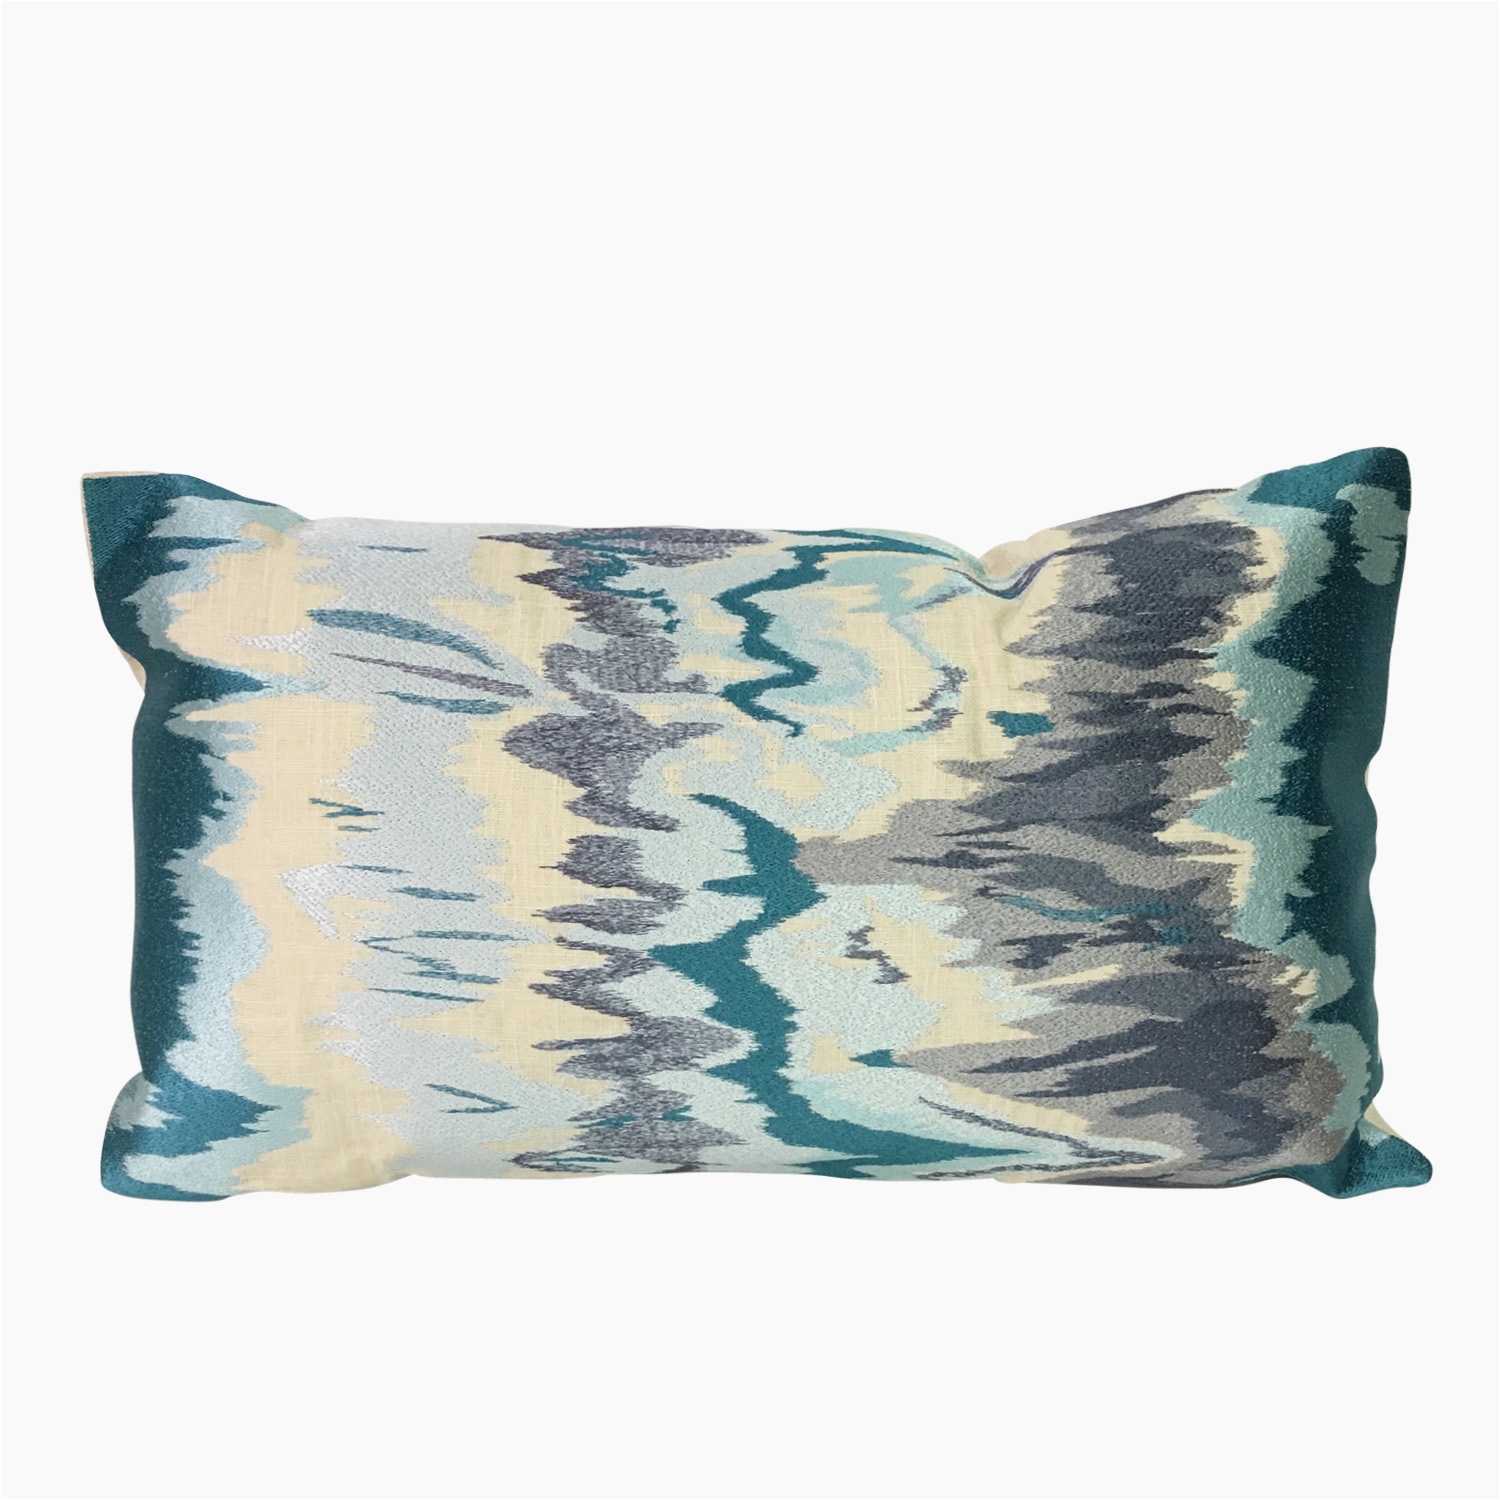 cheap white and gold pillows light blue cushions navy and white throw pillows dark blue cushions rose gold throw pillows navy blue pillow covers with navy